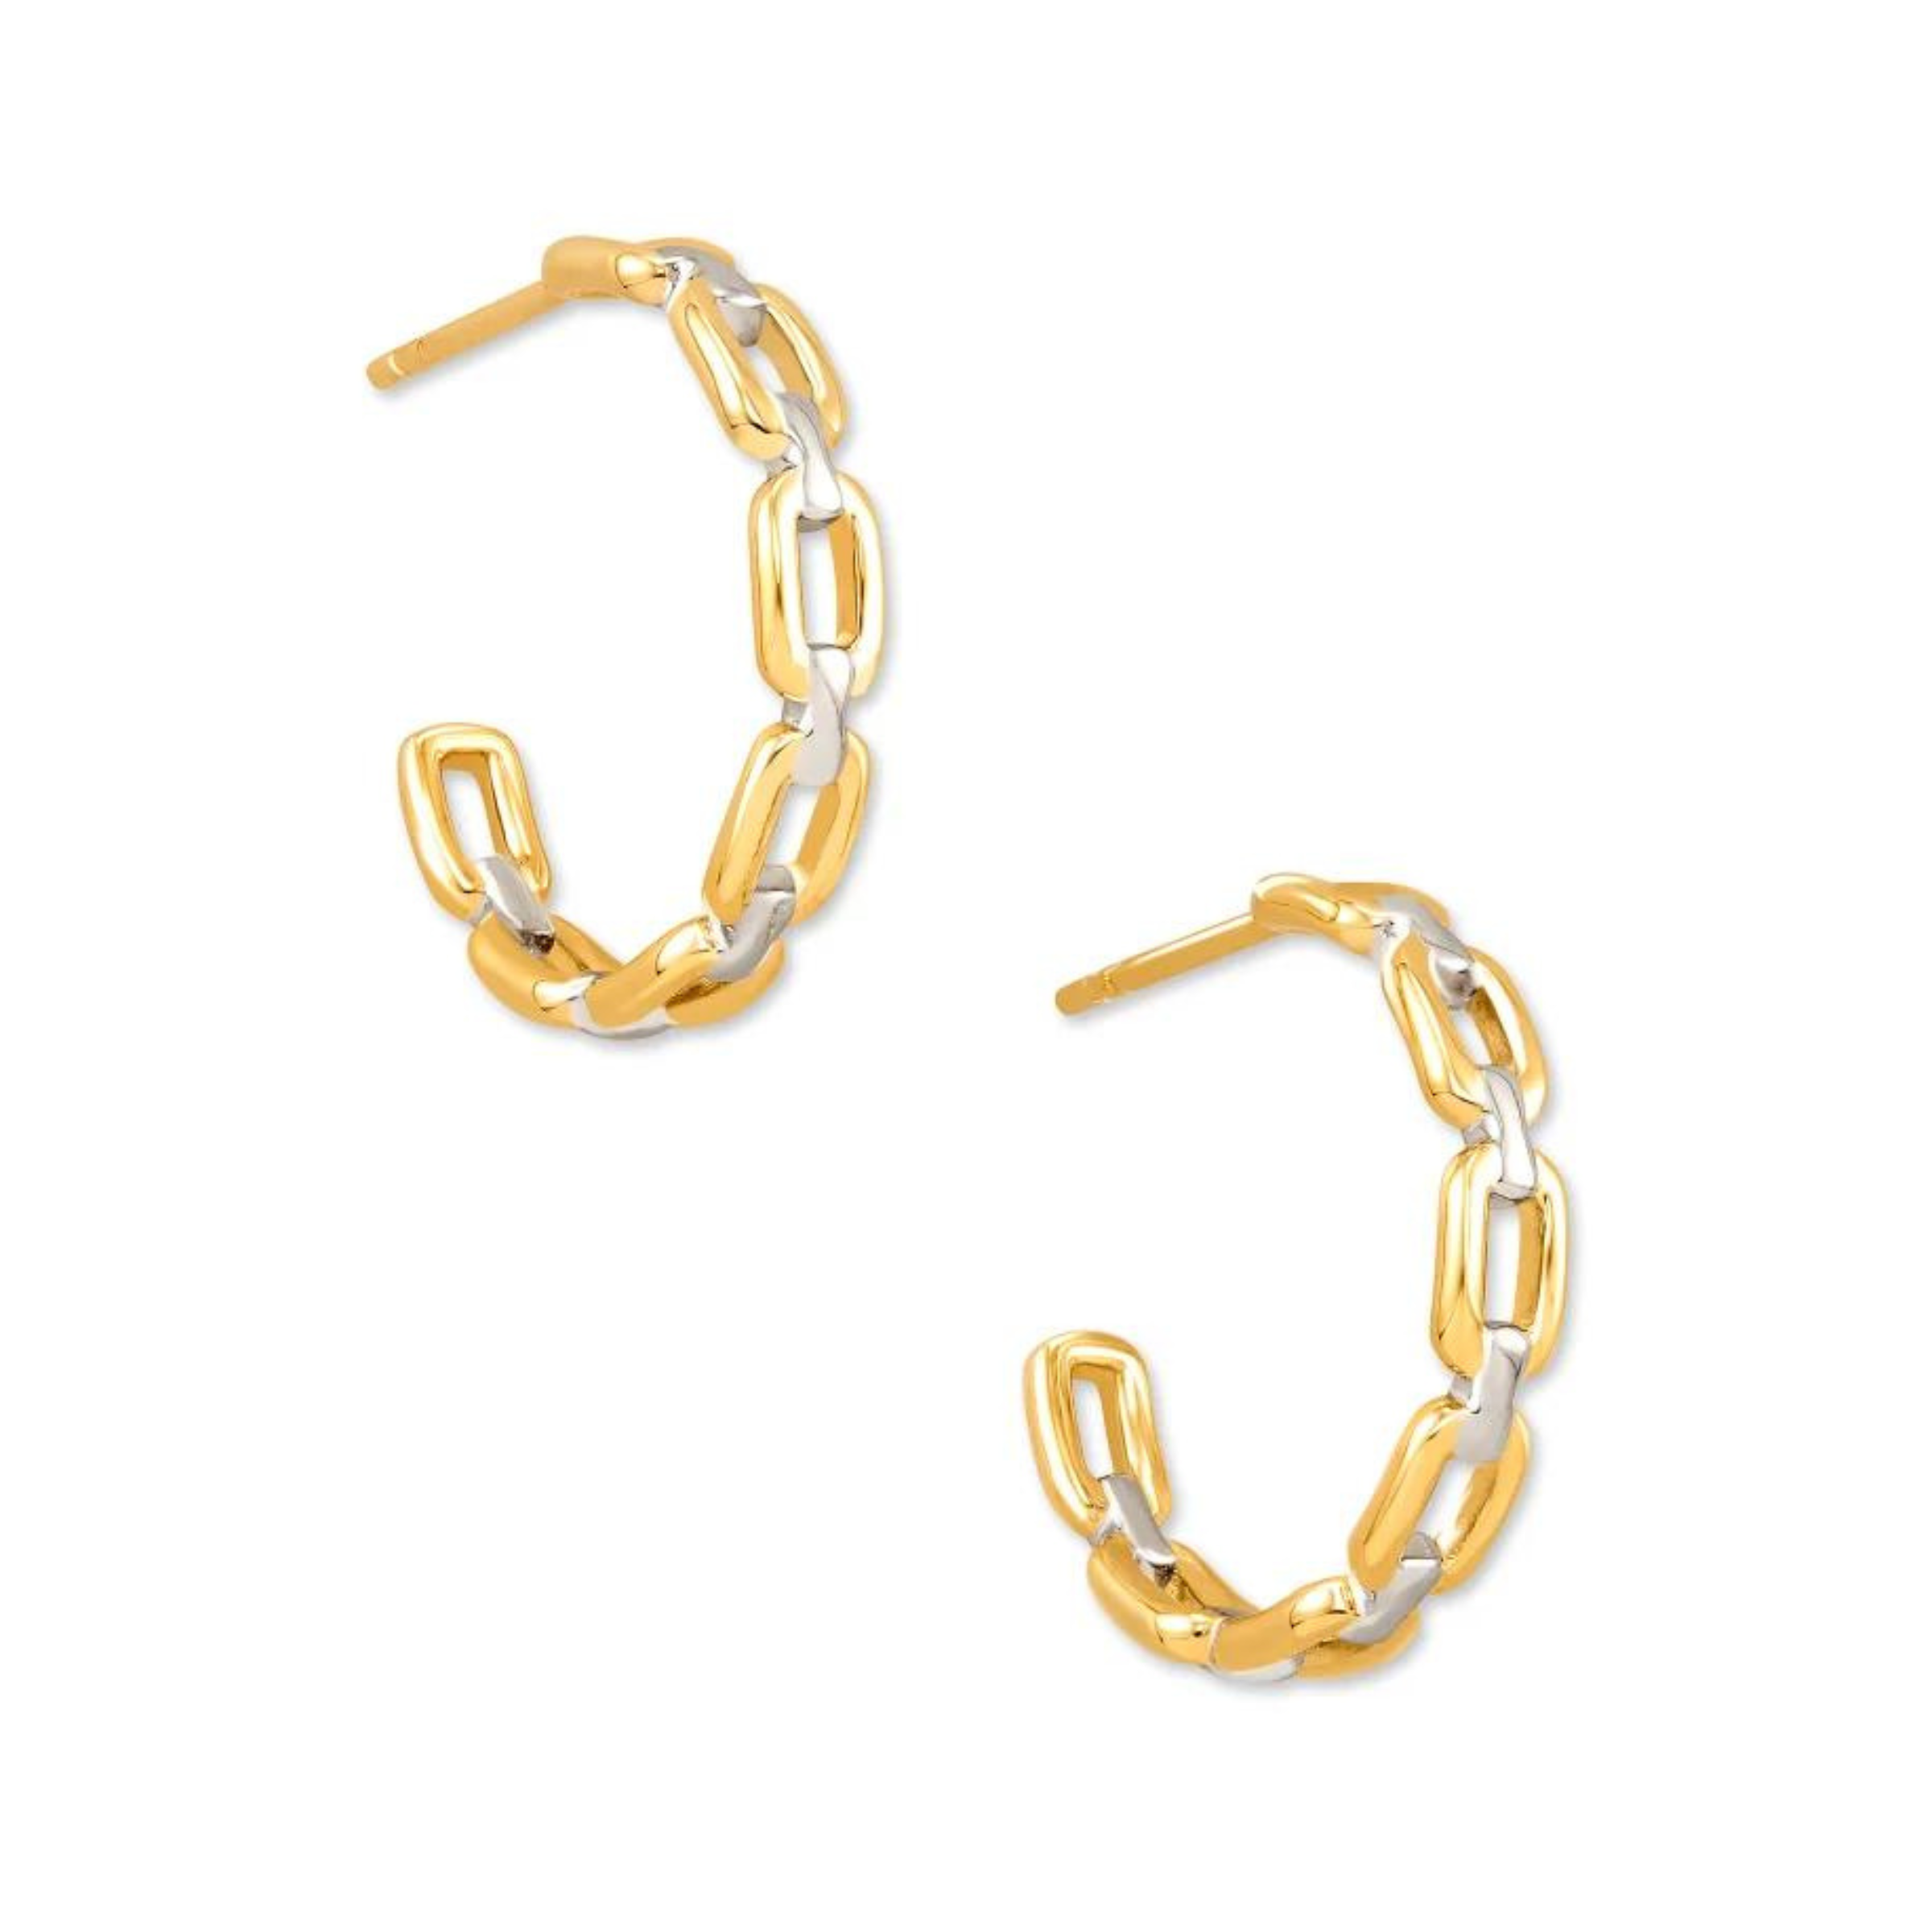 Gold chain hoop earrings with silver chain links. These earrings are pictured on a white background. 